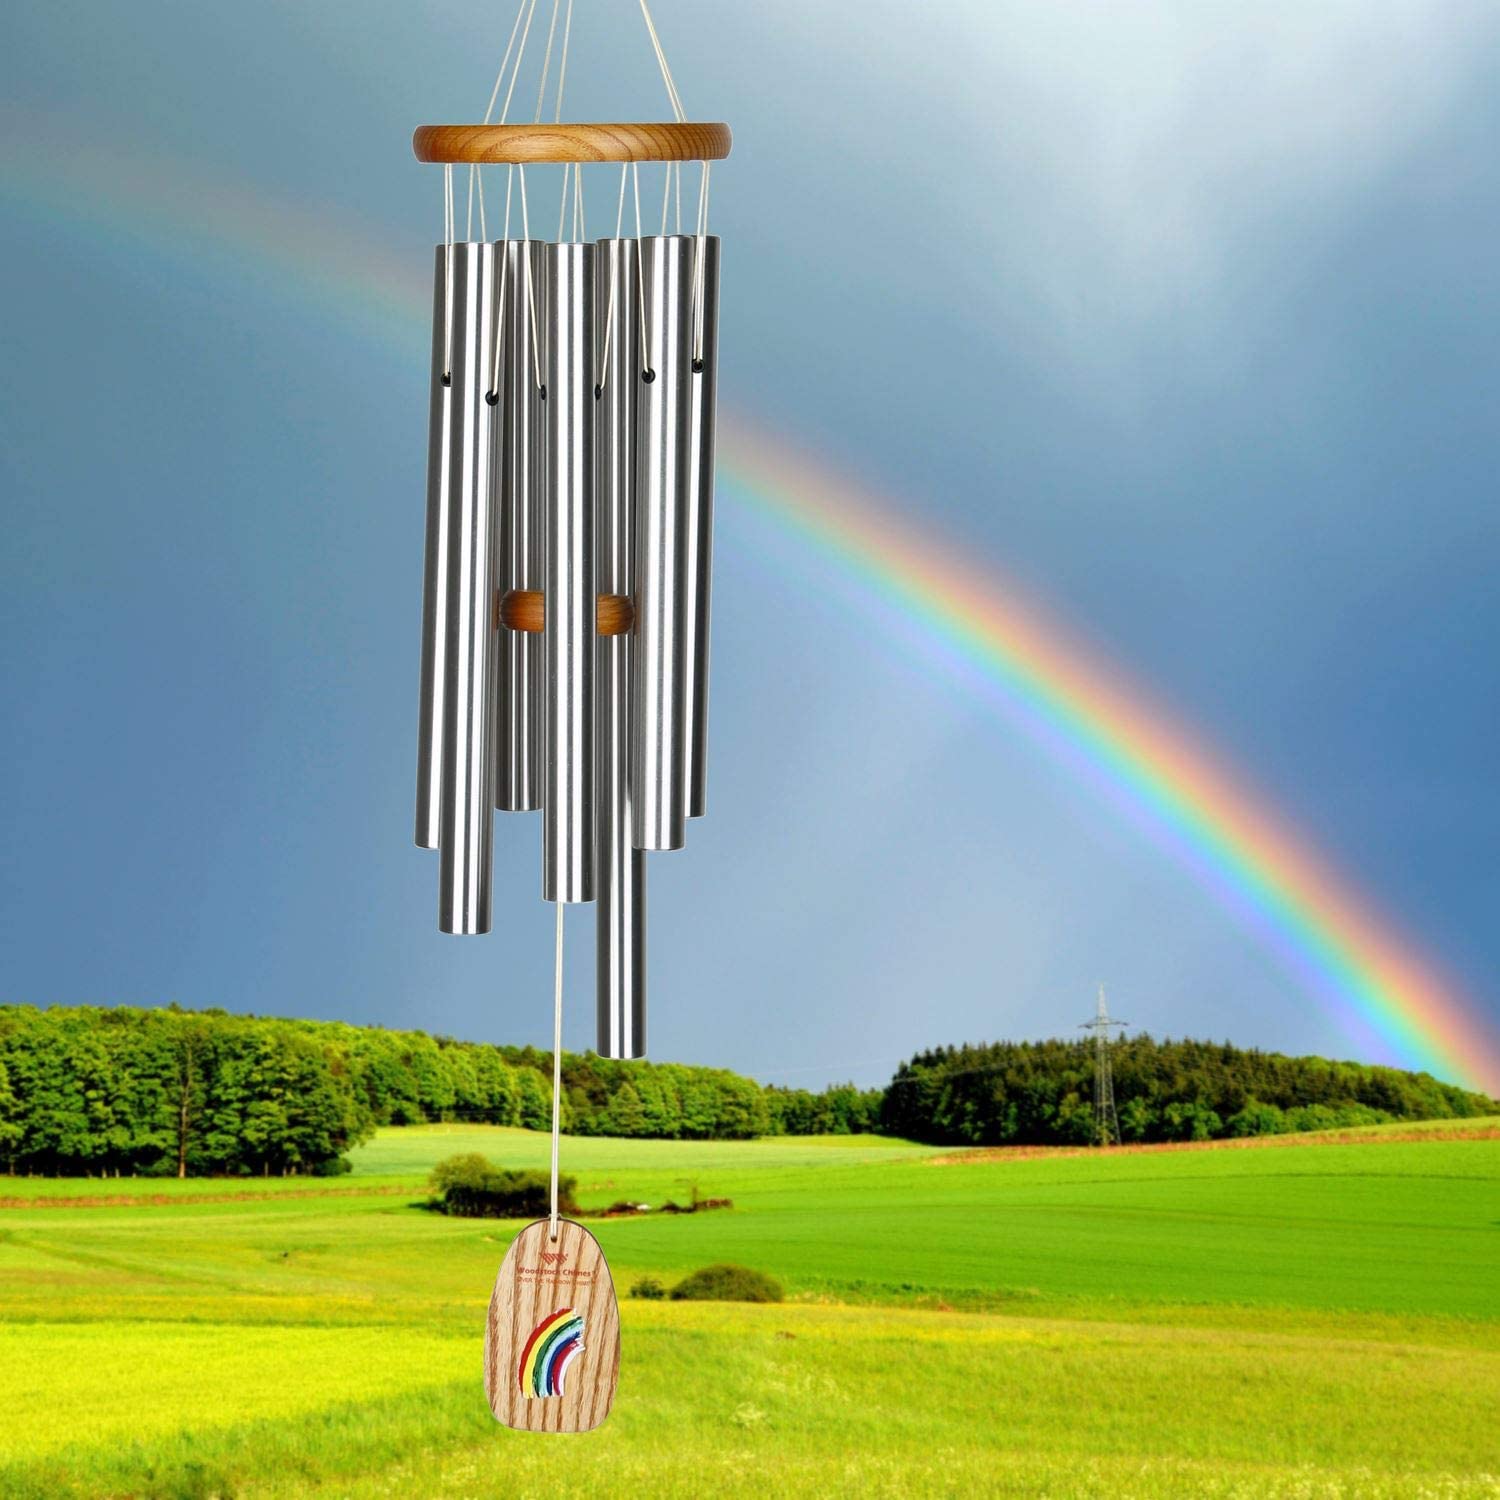 Over the Rainbow 27 Inch Wind Chime - Engravable Sail